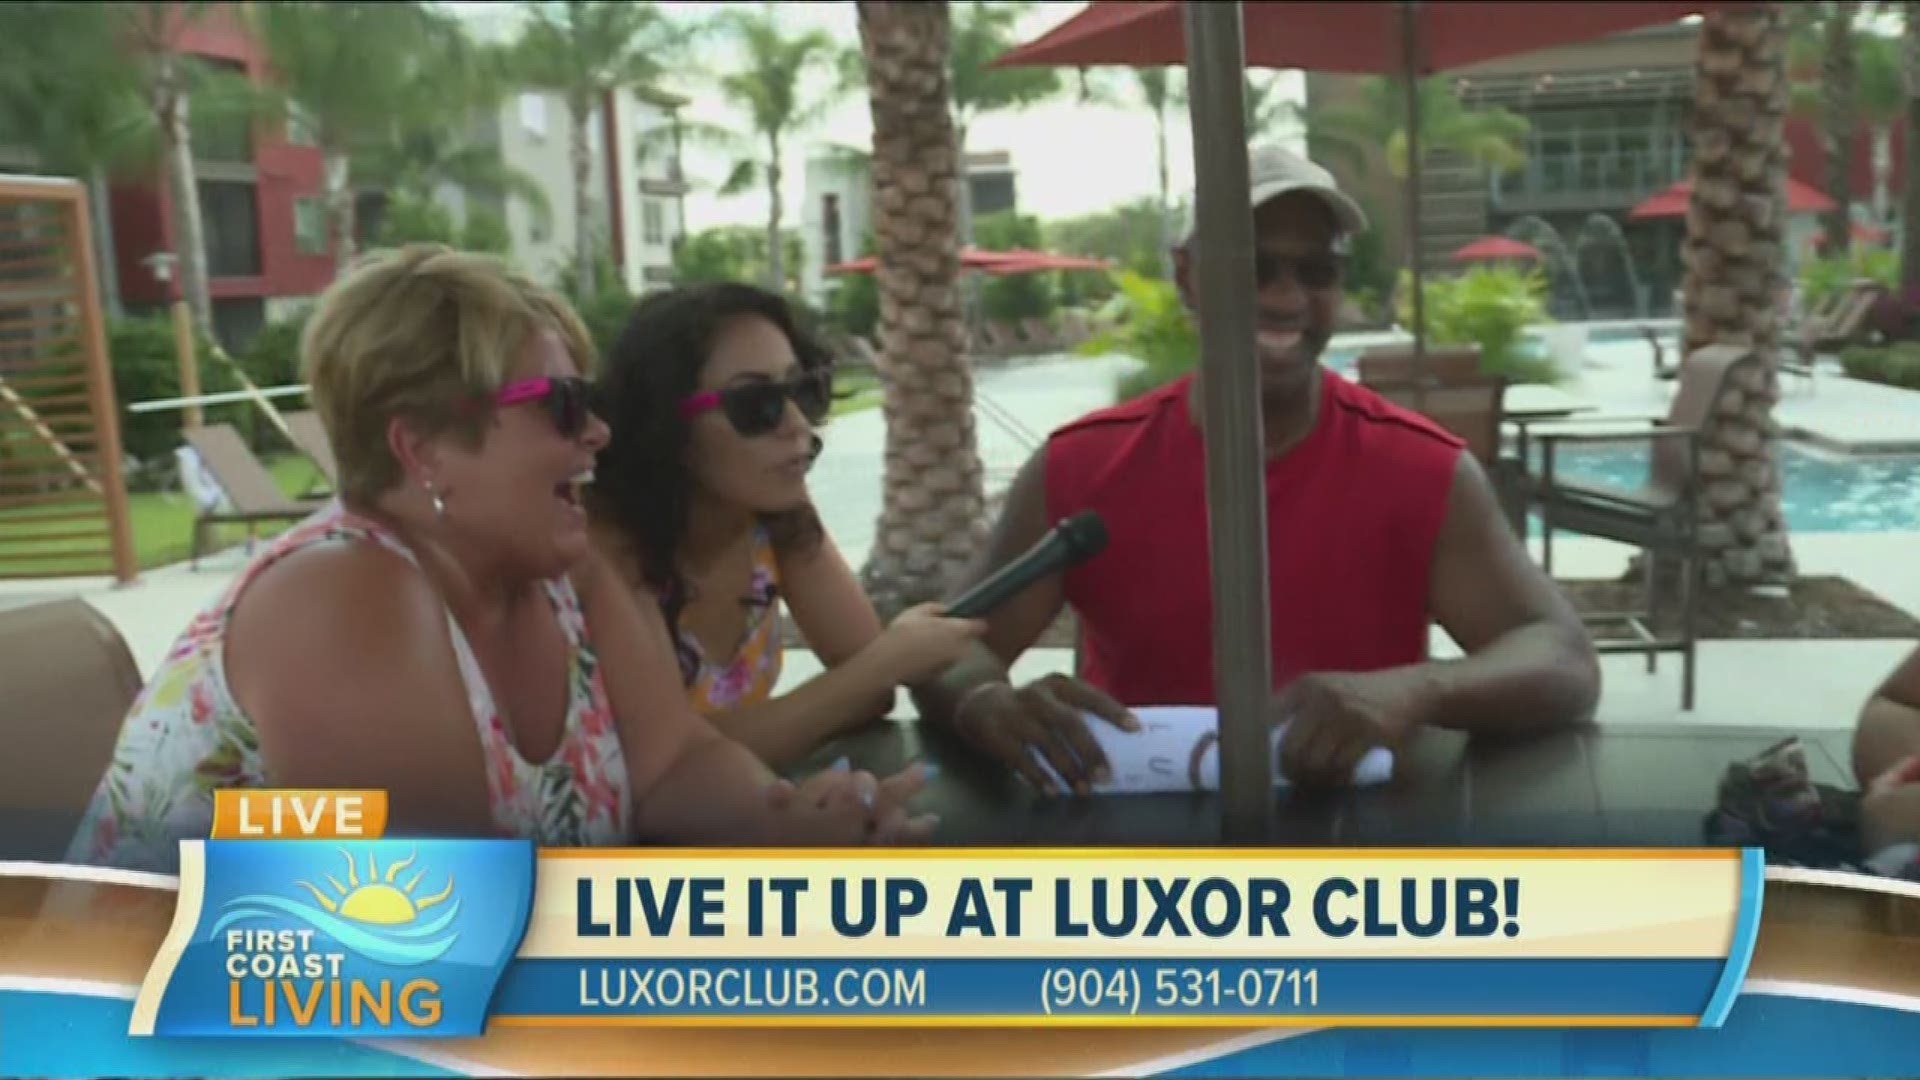 No one better can tell you what it's like living at The Luxor Club apartments better than the residents.